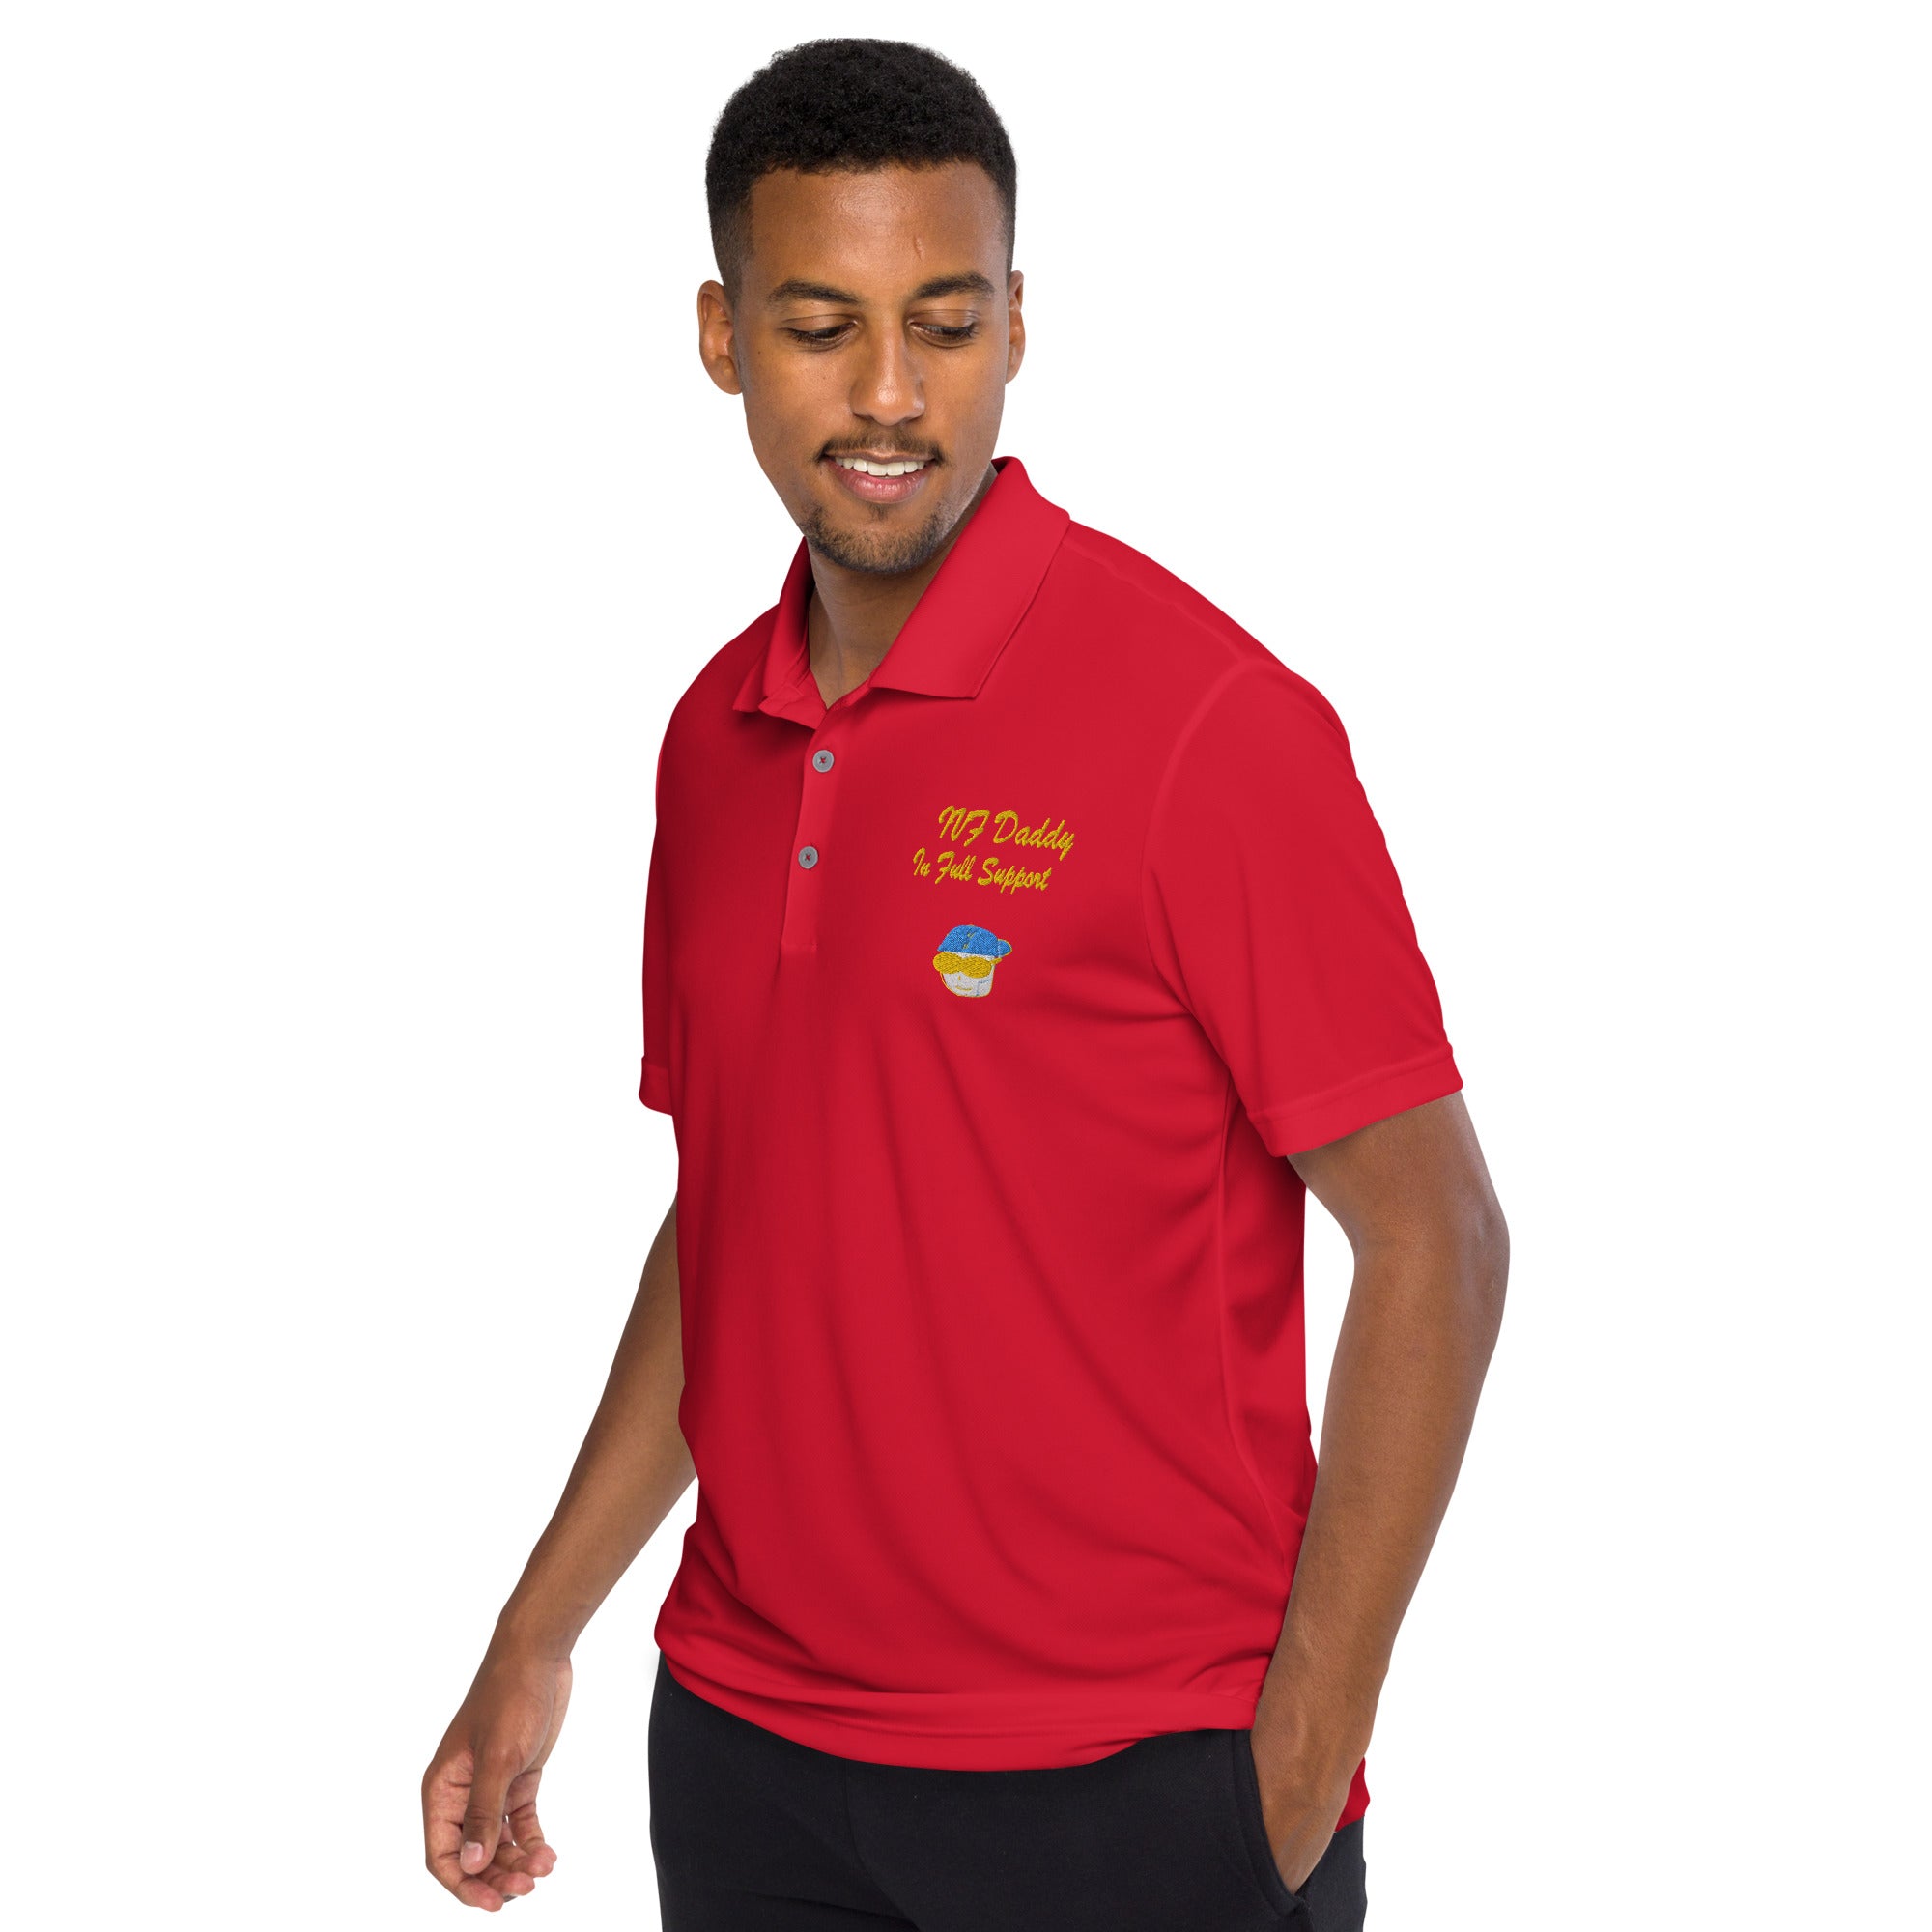 IVF Daddy"s IVF shirt performance polo shirt - Young Hugs